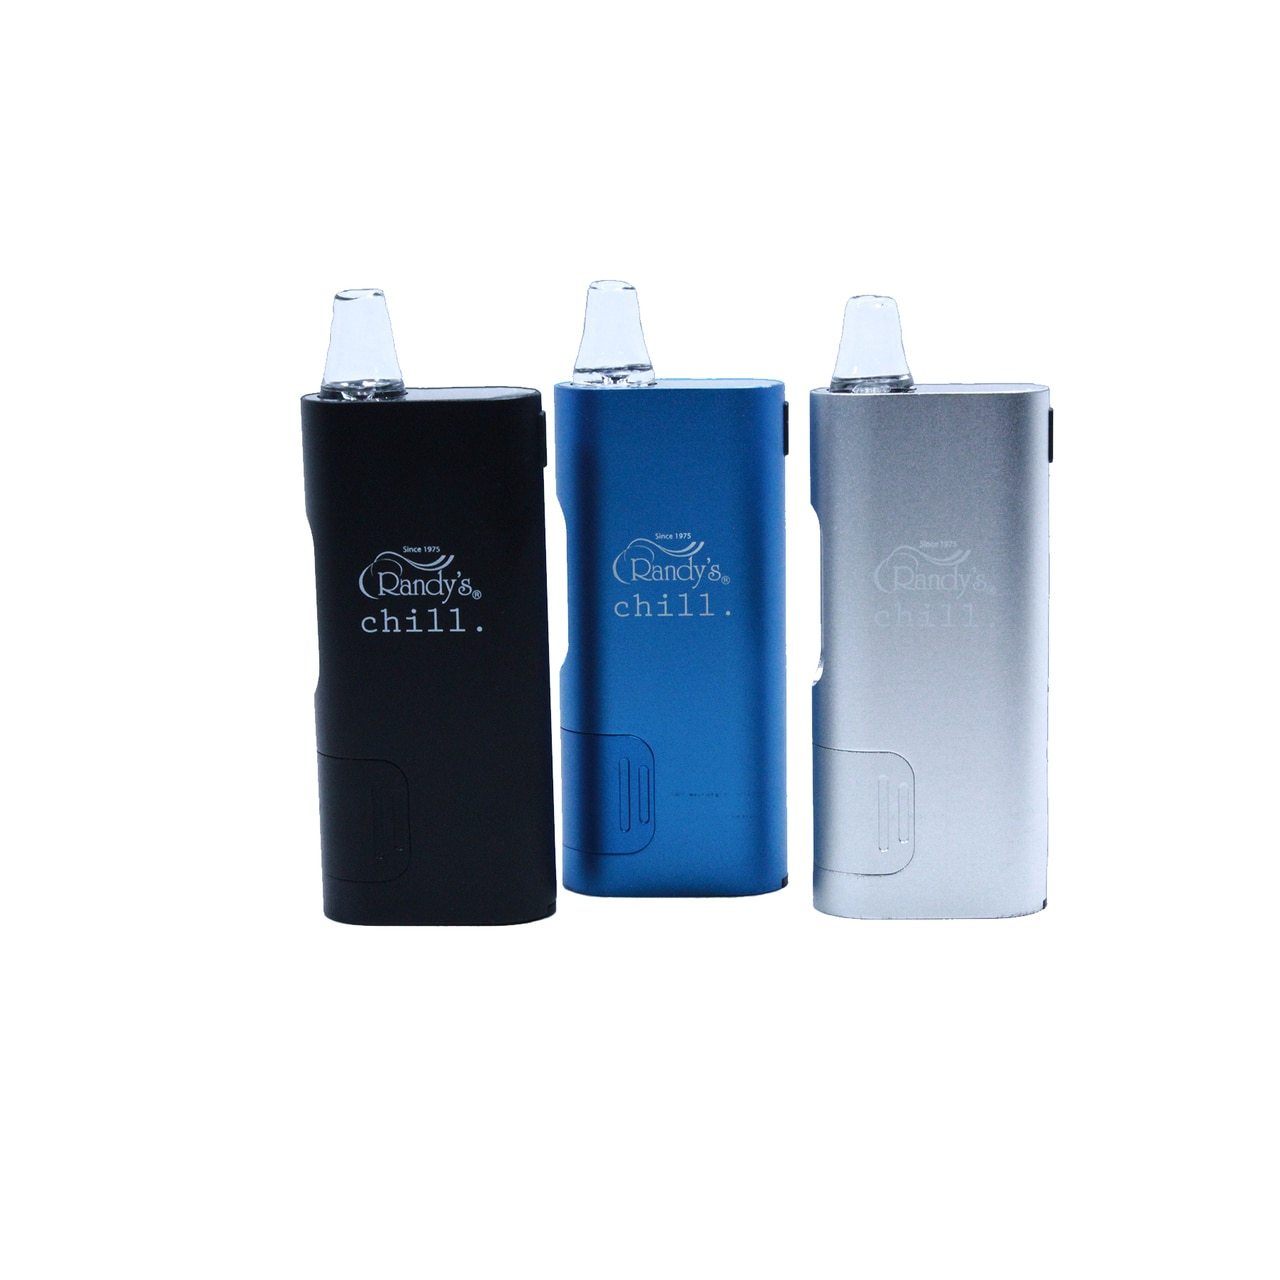 Randy's Chill Vaporizer at Flower Power Packages